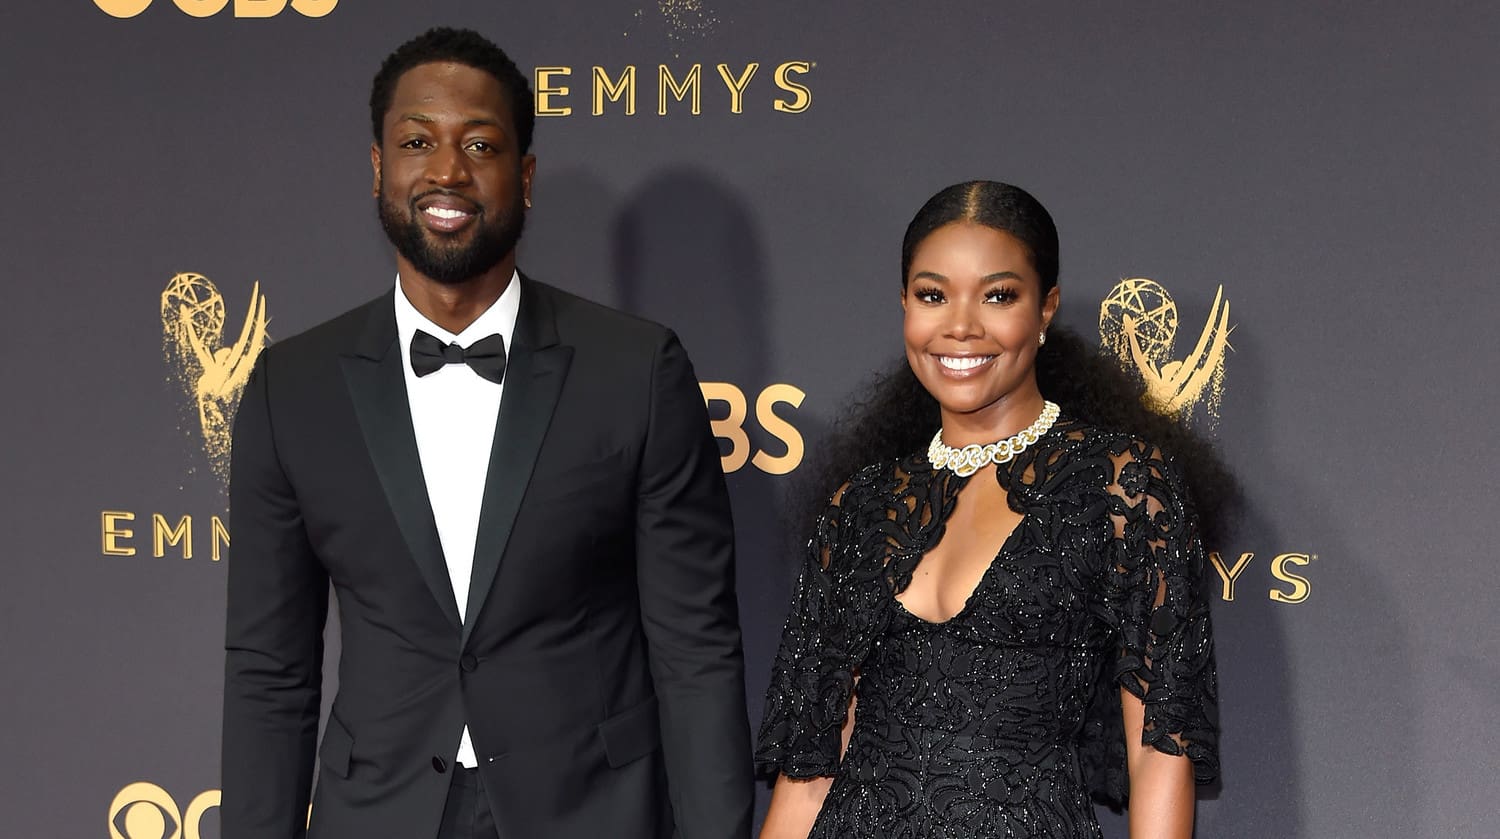 Gabrielle Union’s Latest Photo With Her Smiling Baby Girl Has Fans In Awe – See It ...1500 x 839